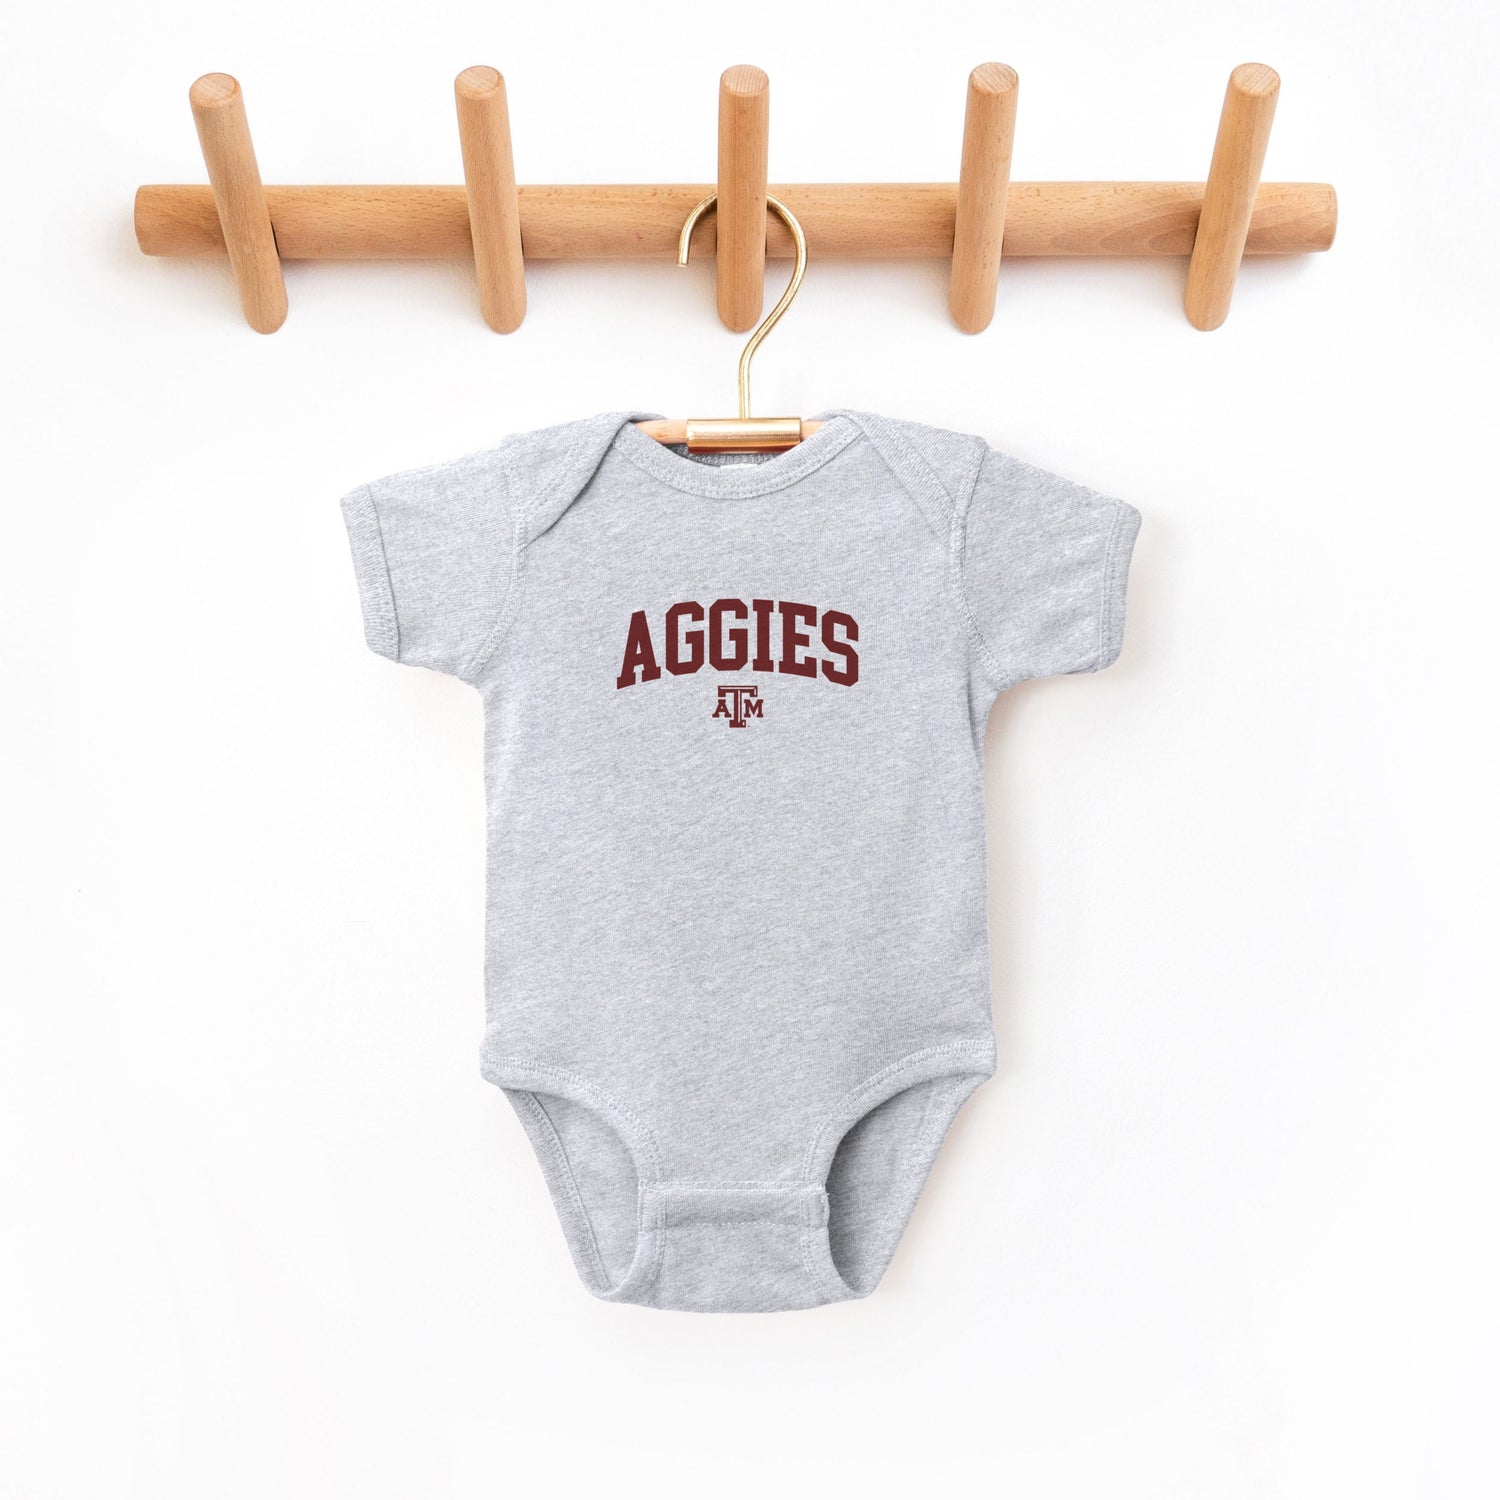 The Heather Grey Infant Unisex Texas A&M Aggies Collegiate Bodysuit lays flat on a white background. The ﻿Texas A&M Aggies Collegiate﻿ graphic is in bold Maroon in a Varsity style.